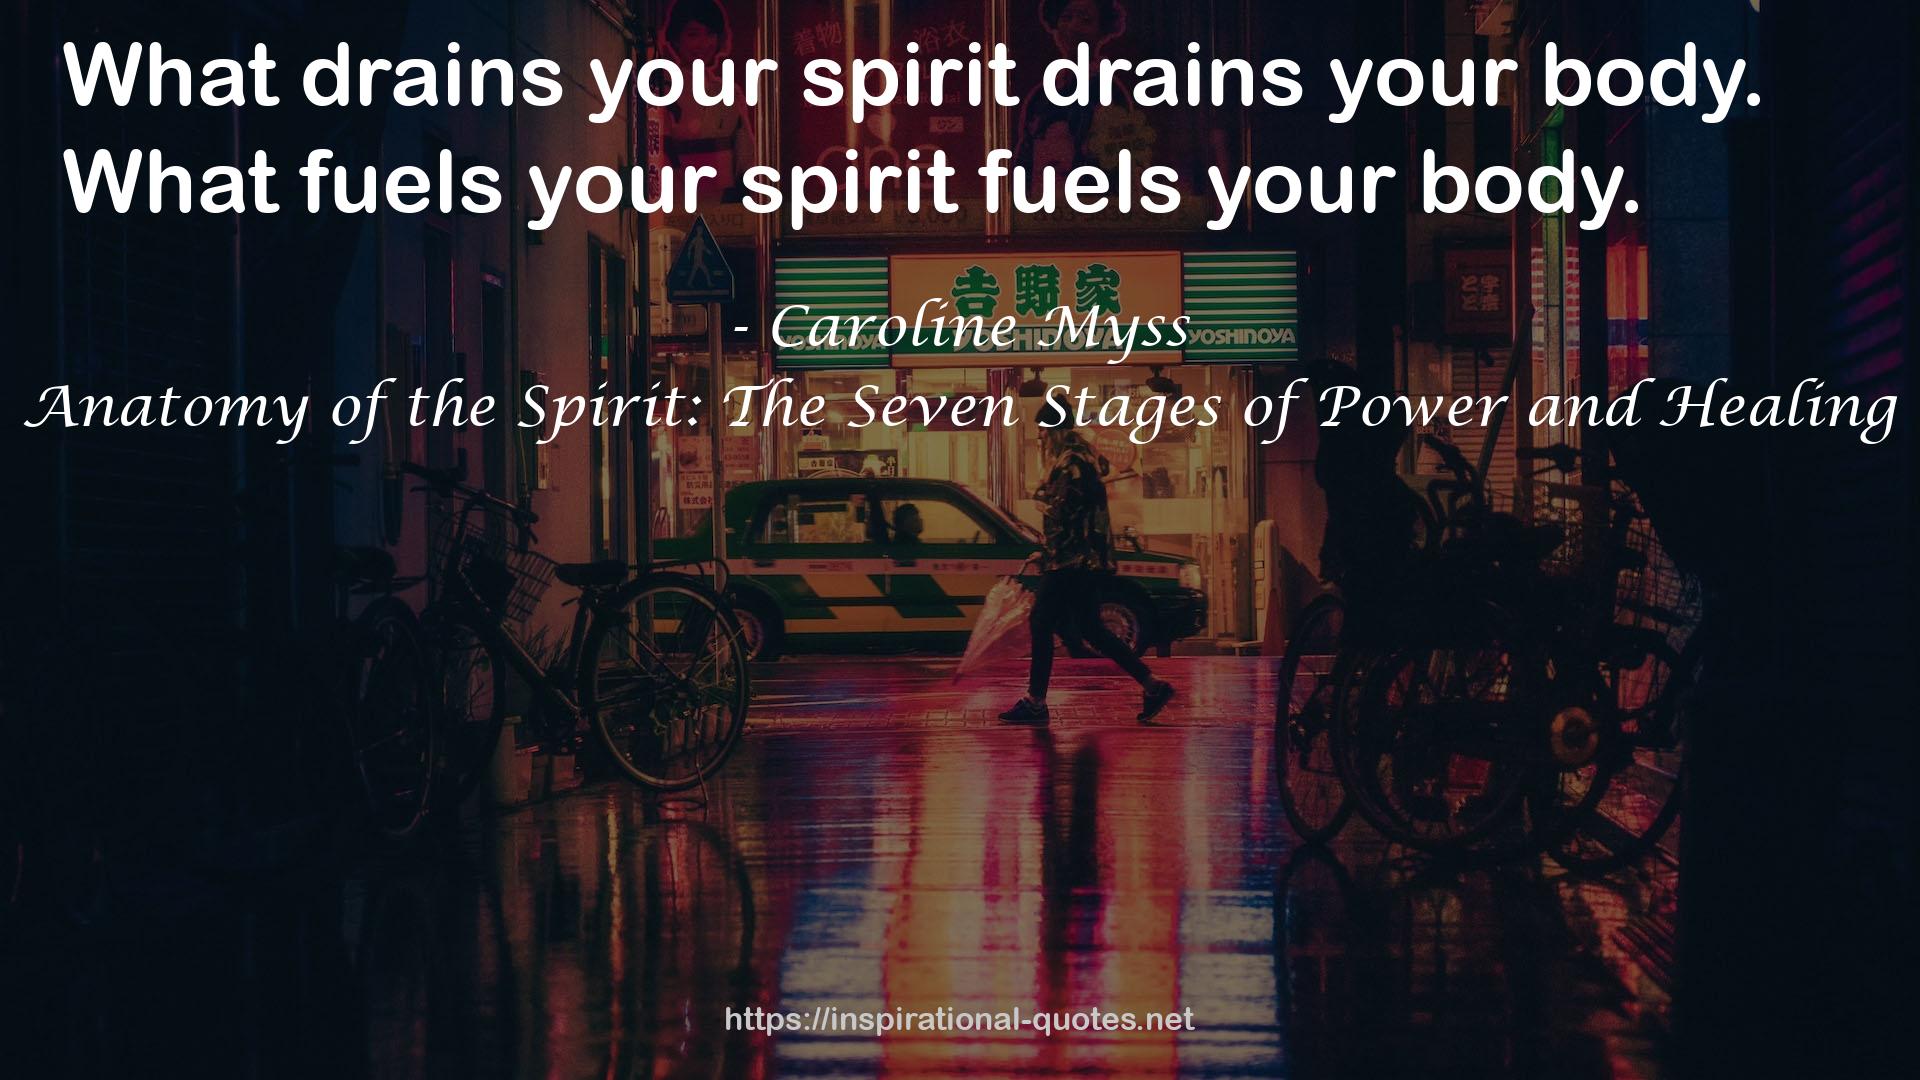 Anatomy of the Spirit: The Seven Stages of Power and Healing QUOTES